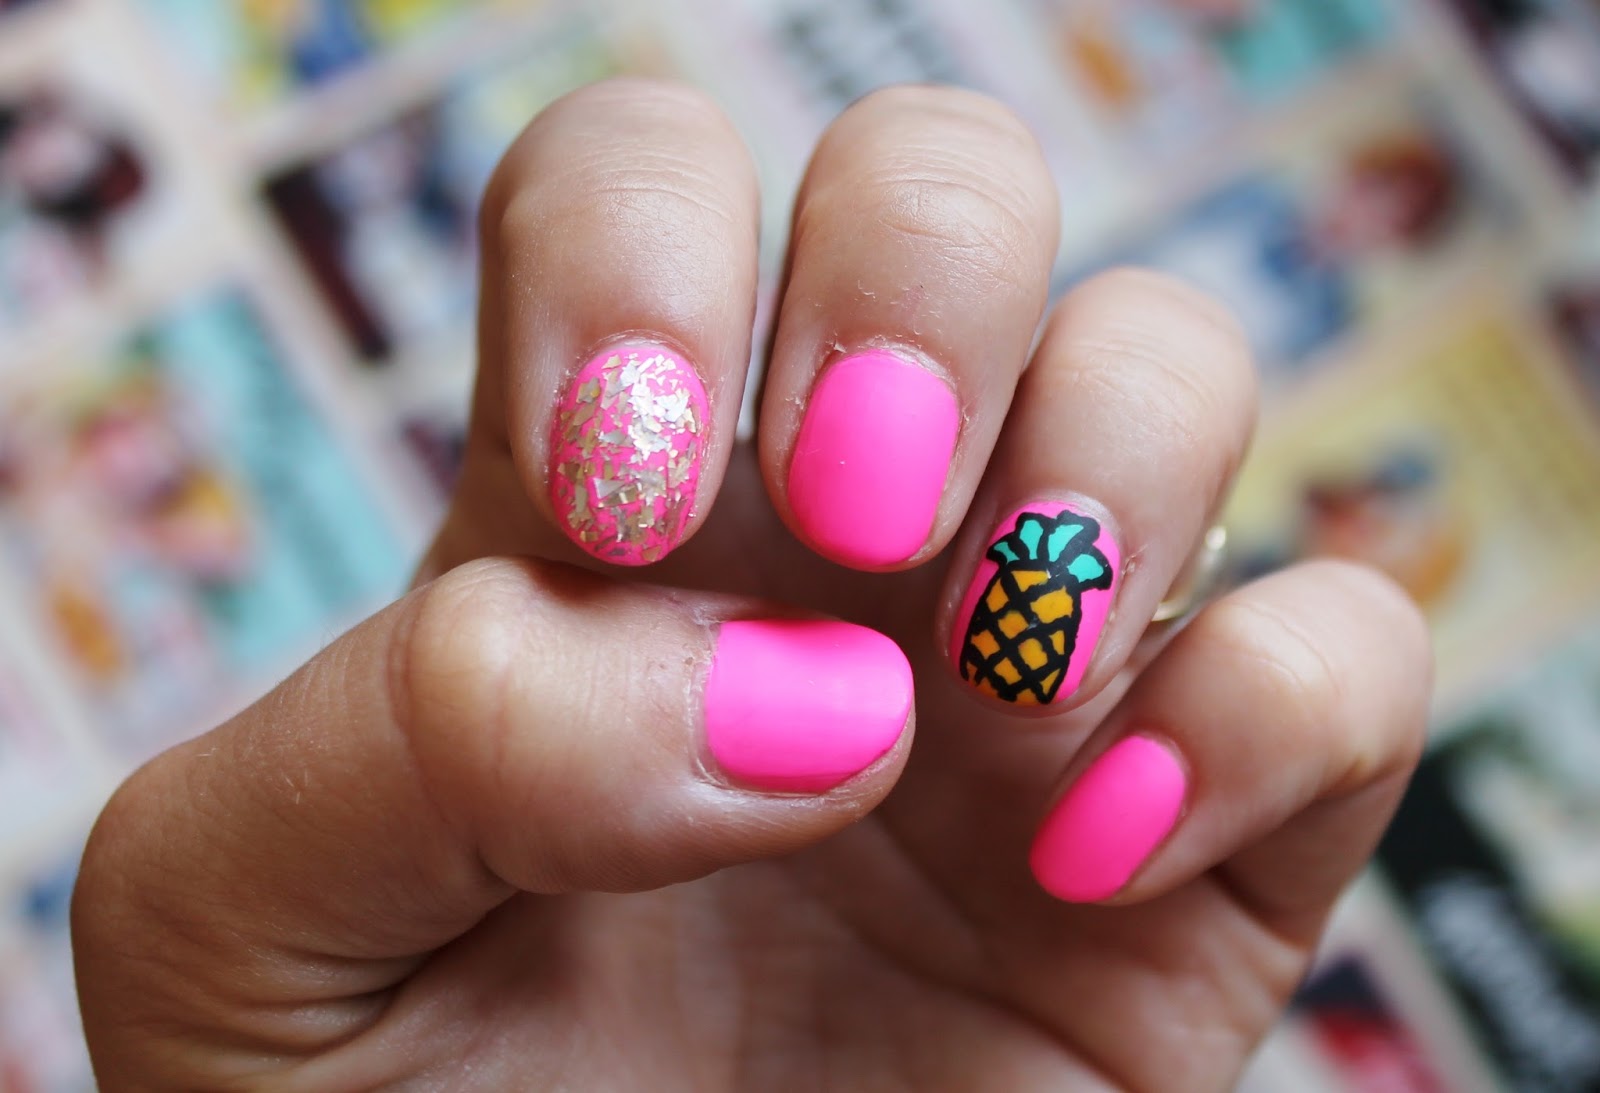 2. Cute Pineapple Nail Designs for Toes - wide 8